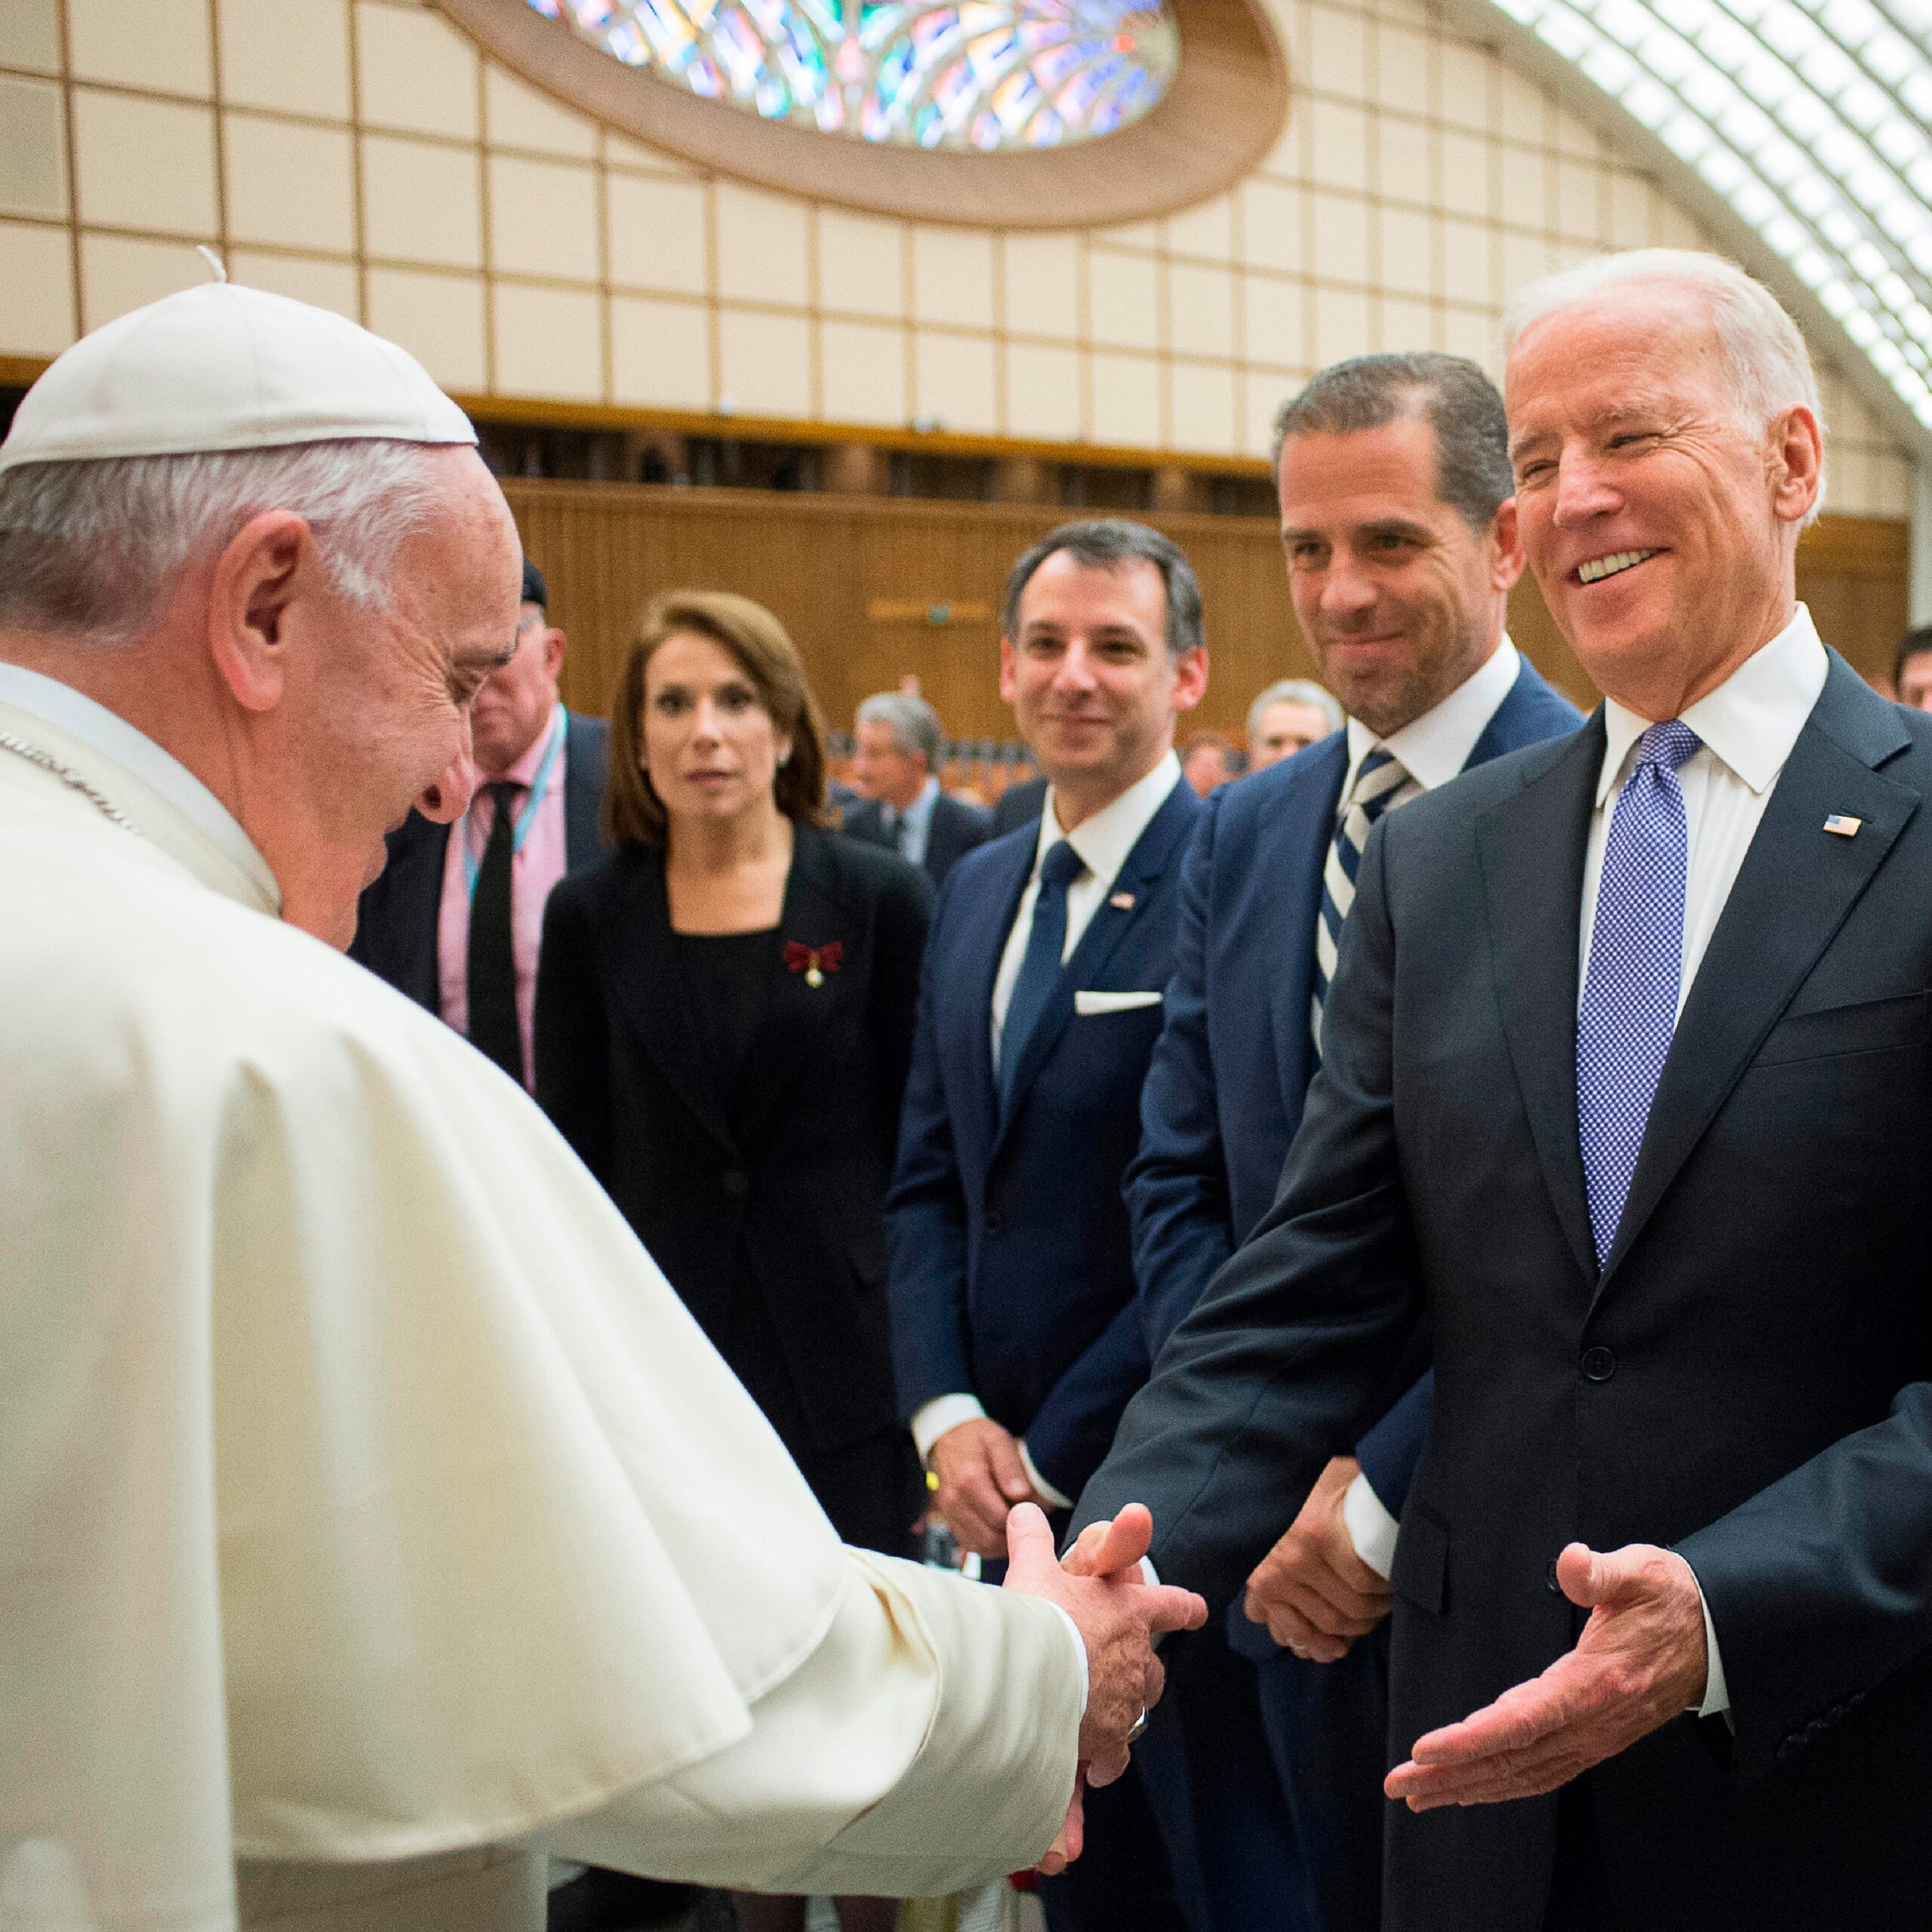 Pope Francis and Biden meet for 90 minutes at the Vatican